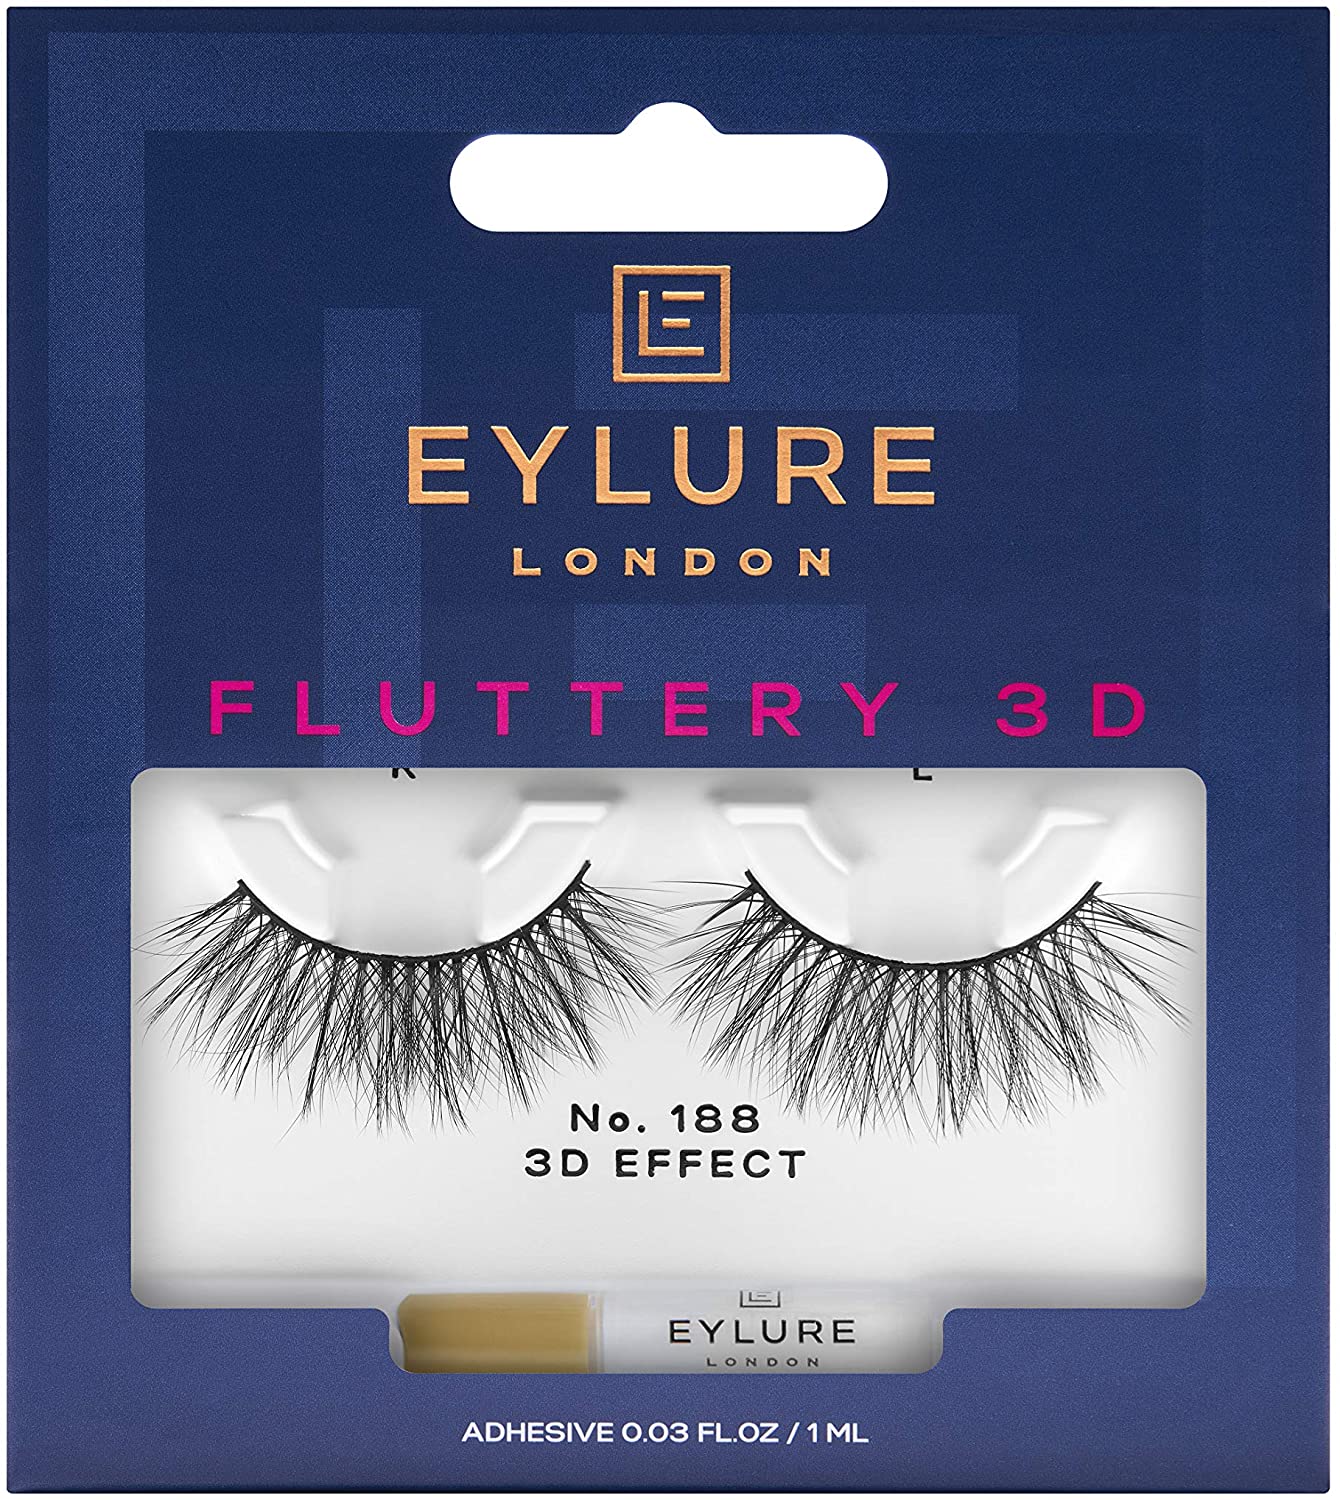 Eylure Fluttery 3D Lashes No. 188